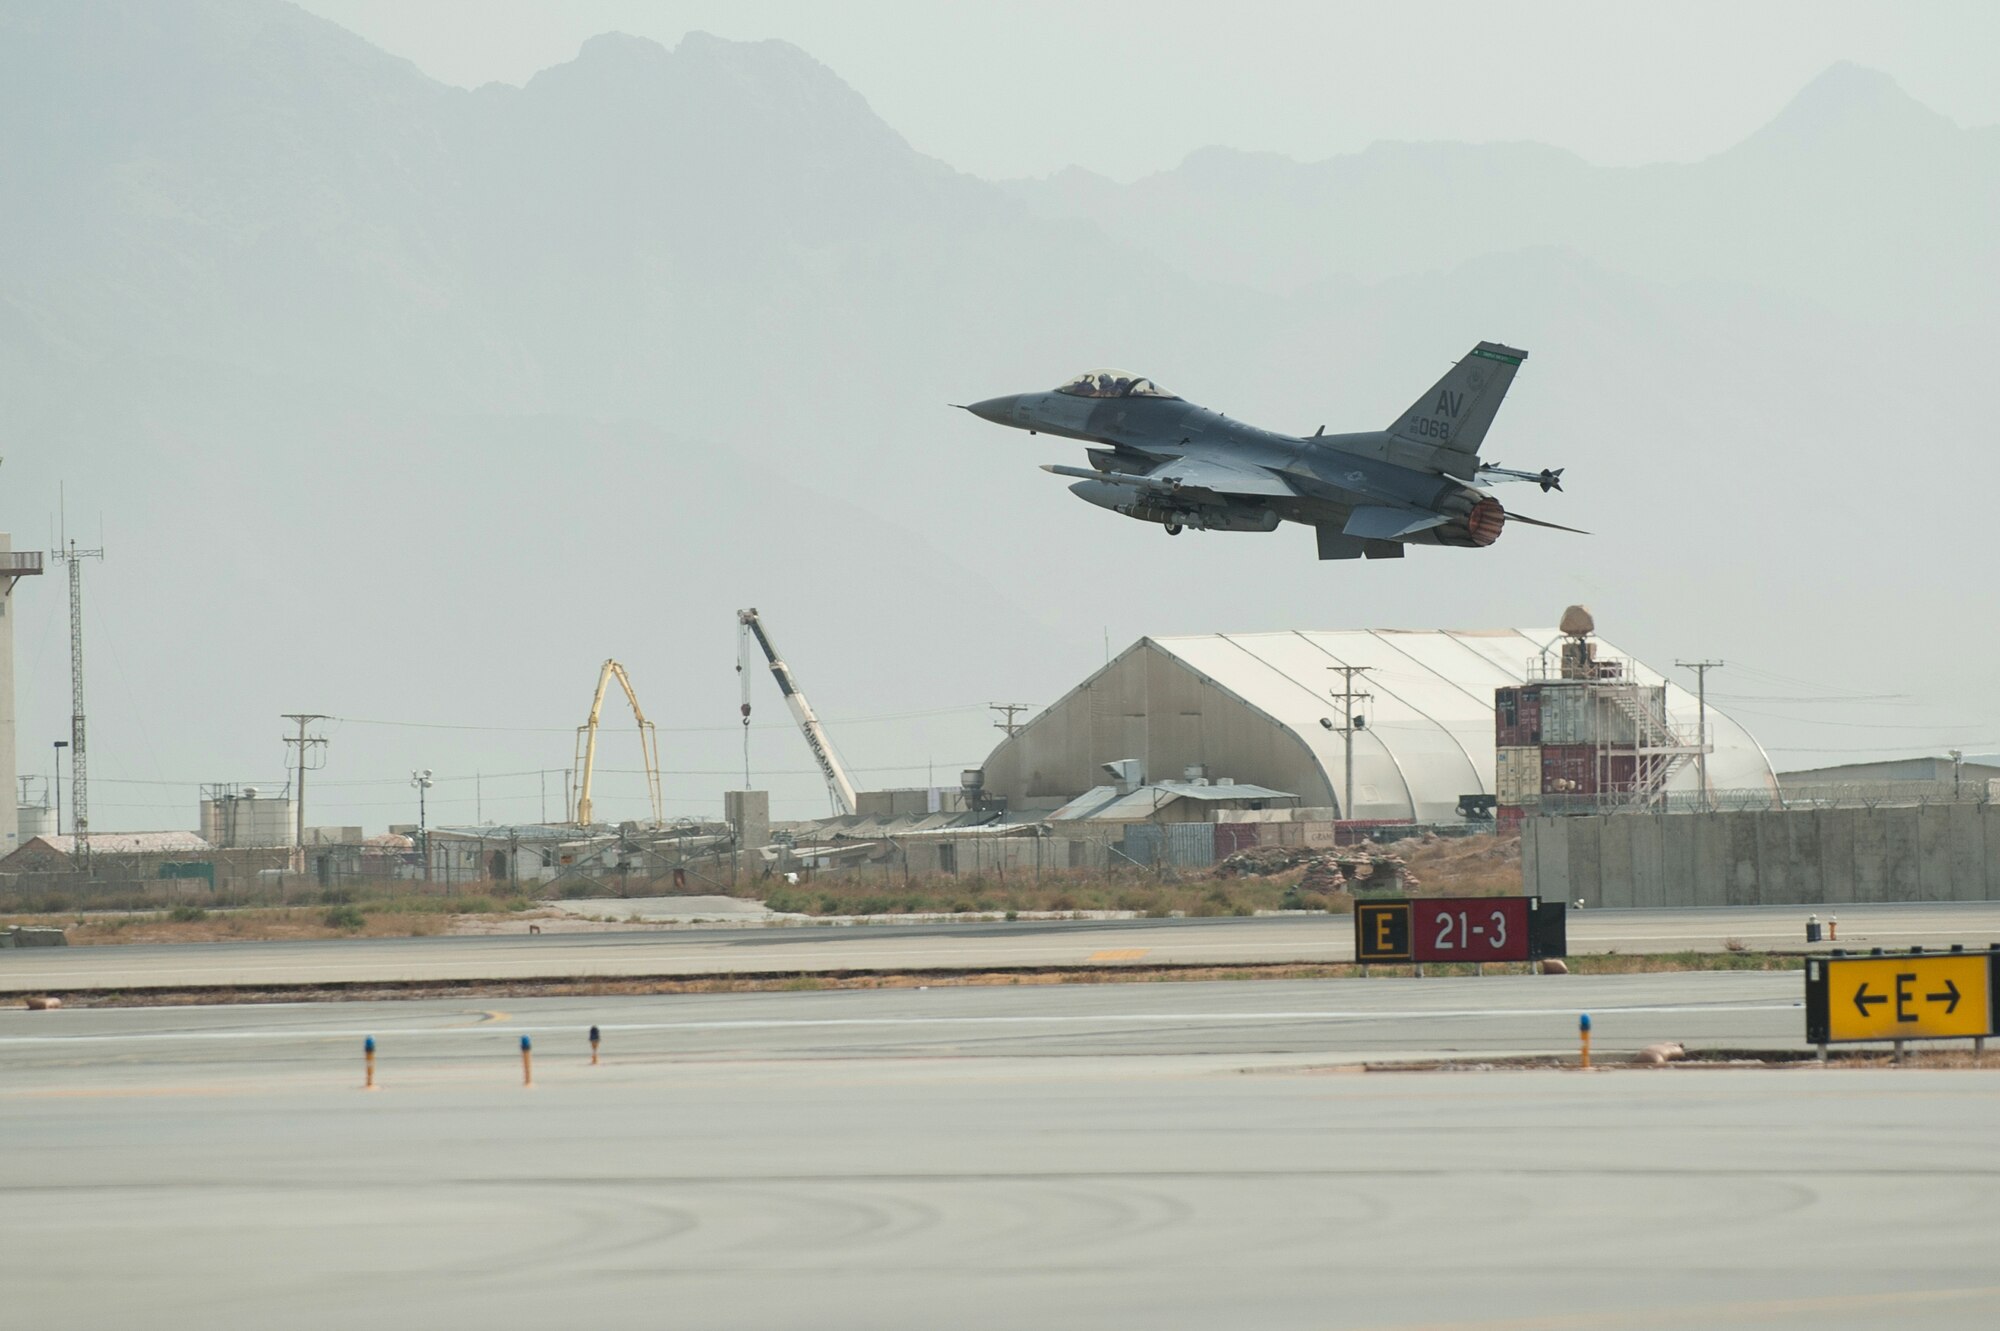 A U.S. Air Force F-16 Fighting Falcon aircraft assigned to the 555th Expeditionary Fighter Squadron takes off on a combat sortie from Bagram Airfield, Afghanistan, Sept. 21, 2015. The F-16 is a multi-role fighter aircraft that is highly maneuverable and has proven itself in air-to-air and air-to-ground combat. (U.S. Air Force photo by Tech. Sgt. Joseph Swafford/Released)